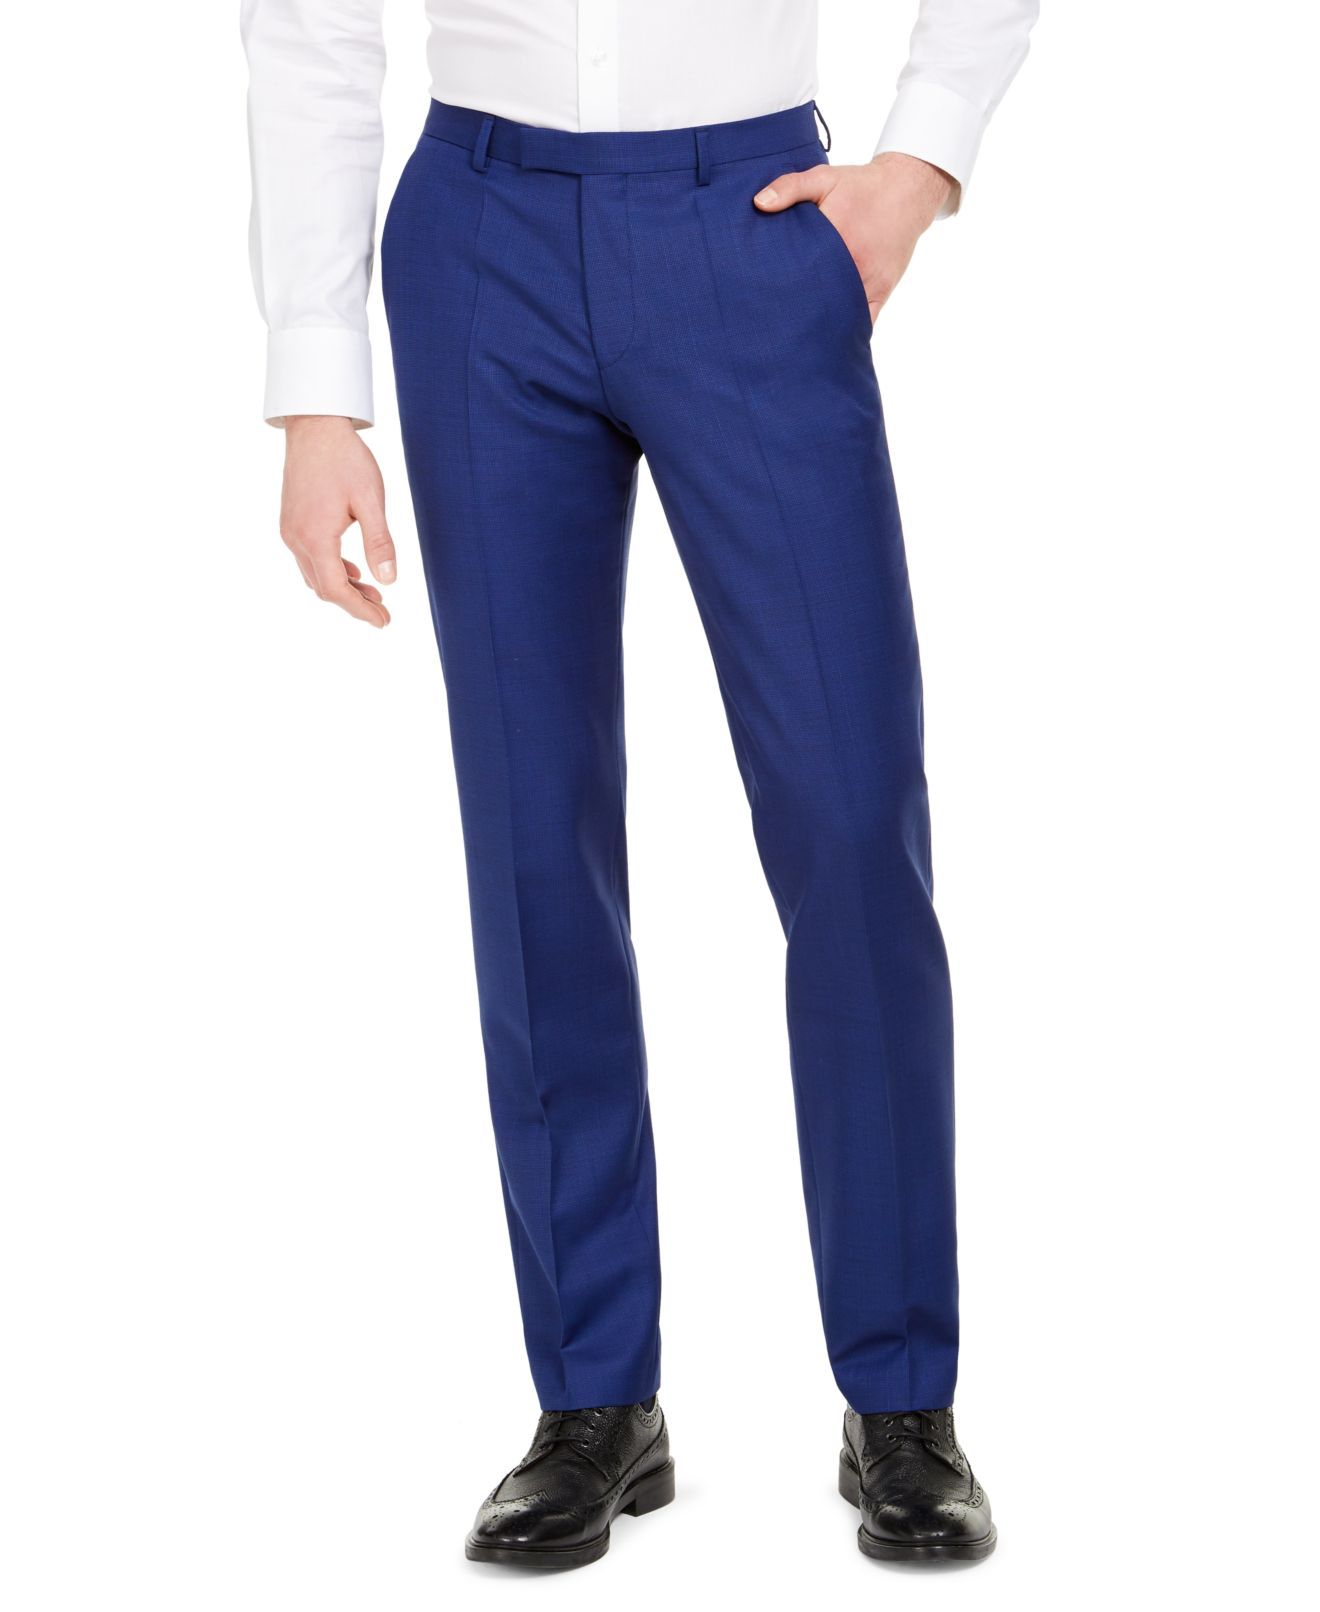 Color: Blues Size Type: Regular Bottoms Size (Men's): 32 Inseam: 30 Type: Pants Style: Dress Pants Occasion: Formal Material: 100% Wool. style:straight. fit:slim. occasion:causal. wash:dark-wash